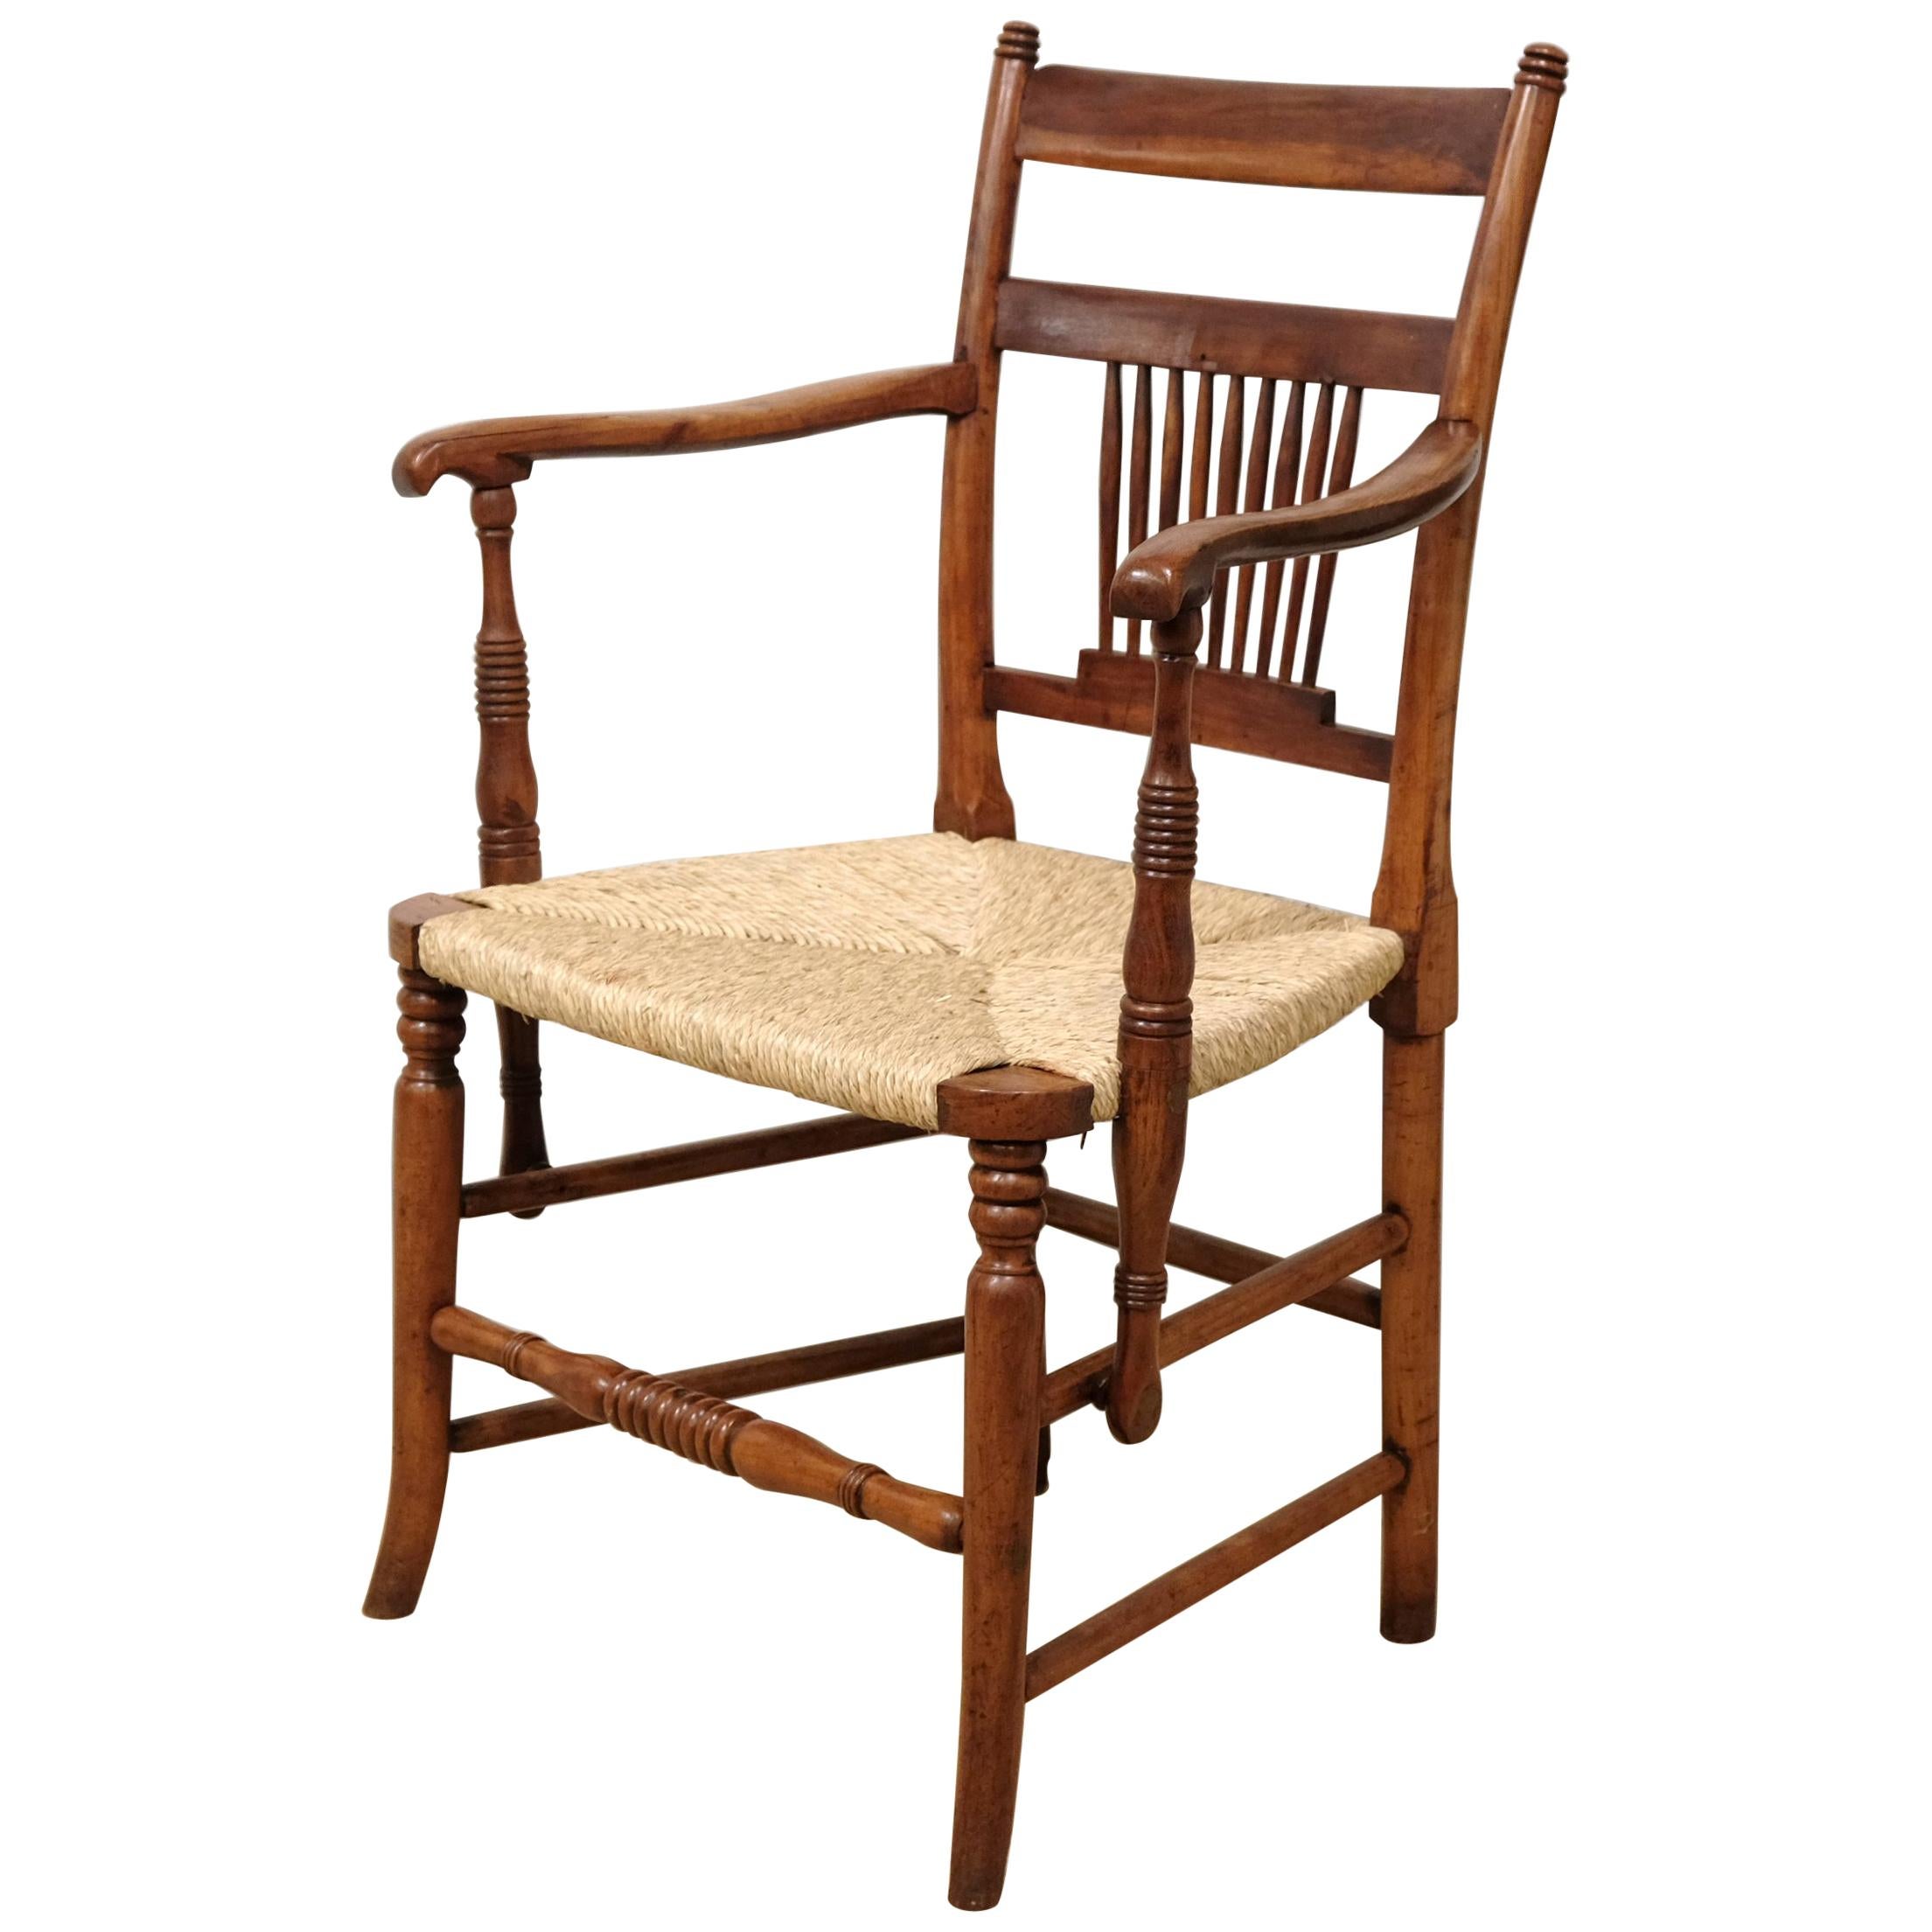 English Fruitwood Windsor Chair with Rush Seat, East Anglia, Rich Color